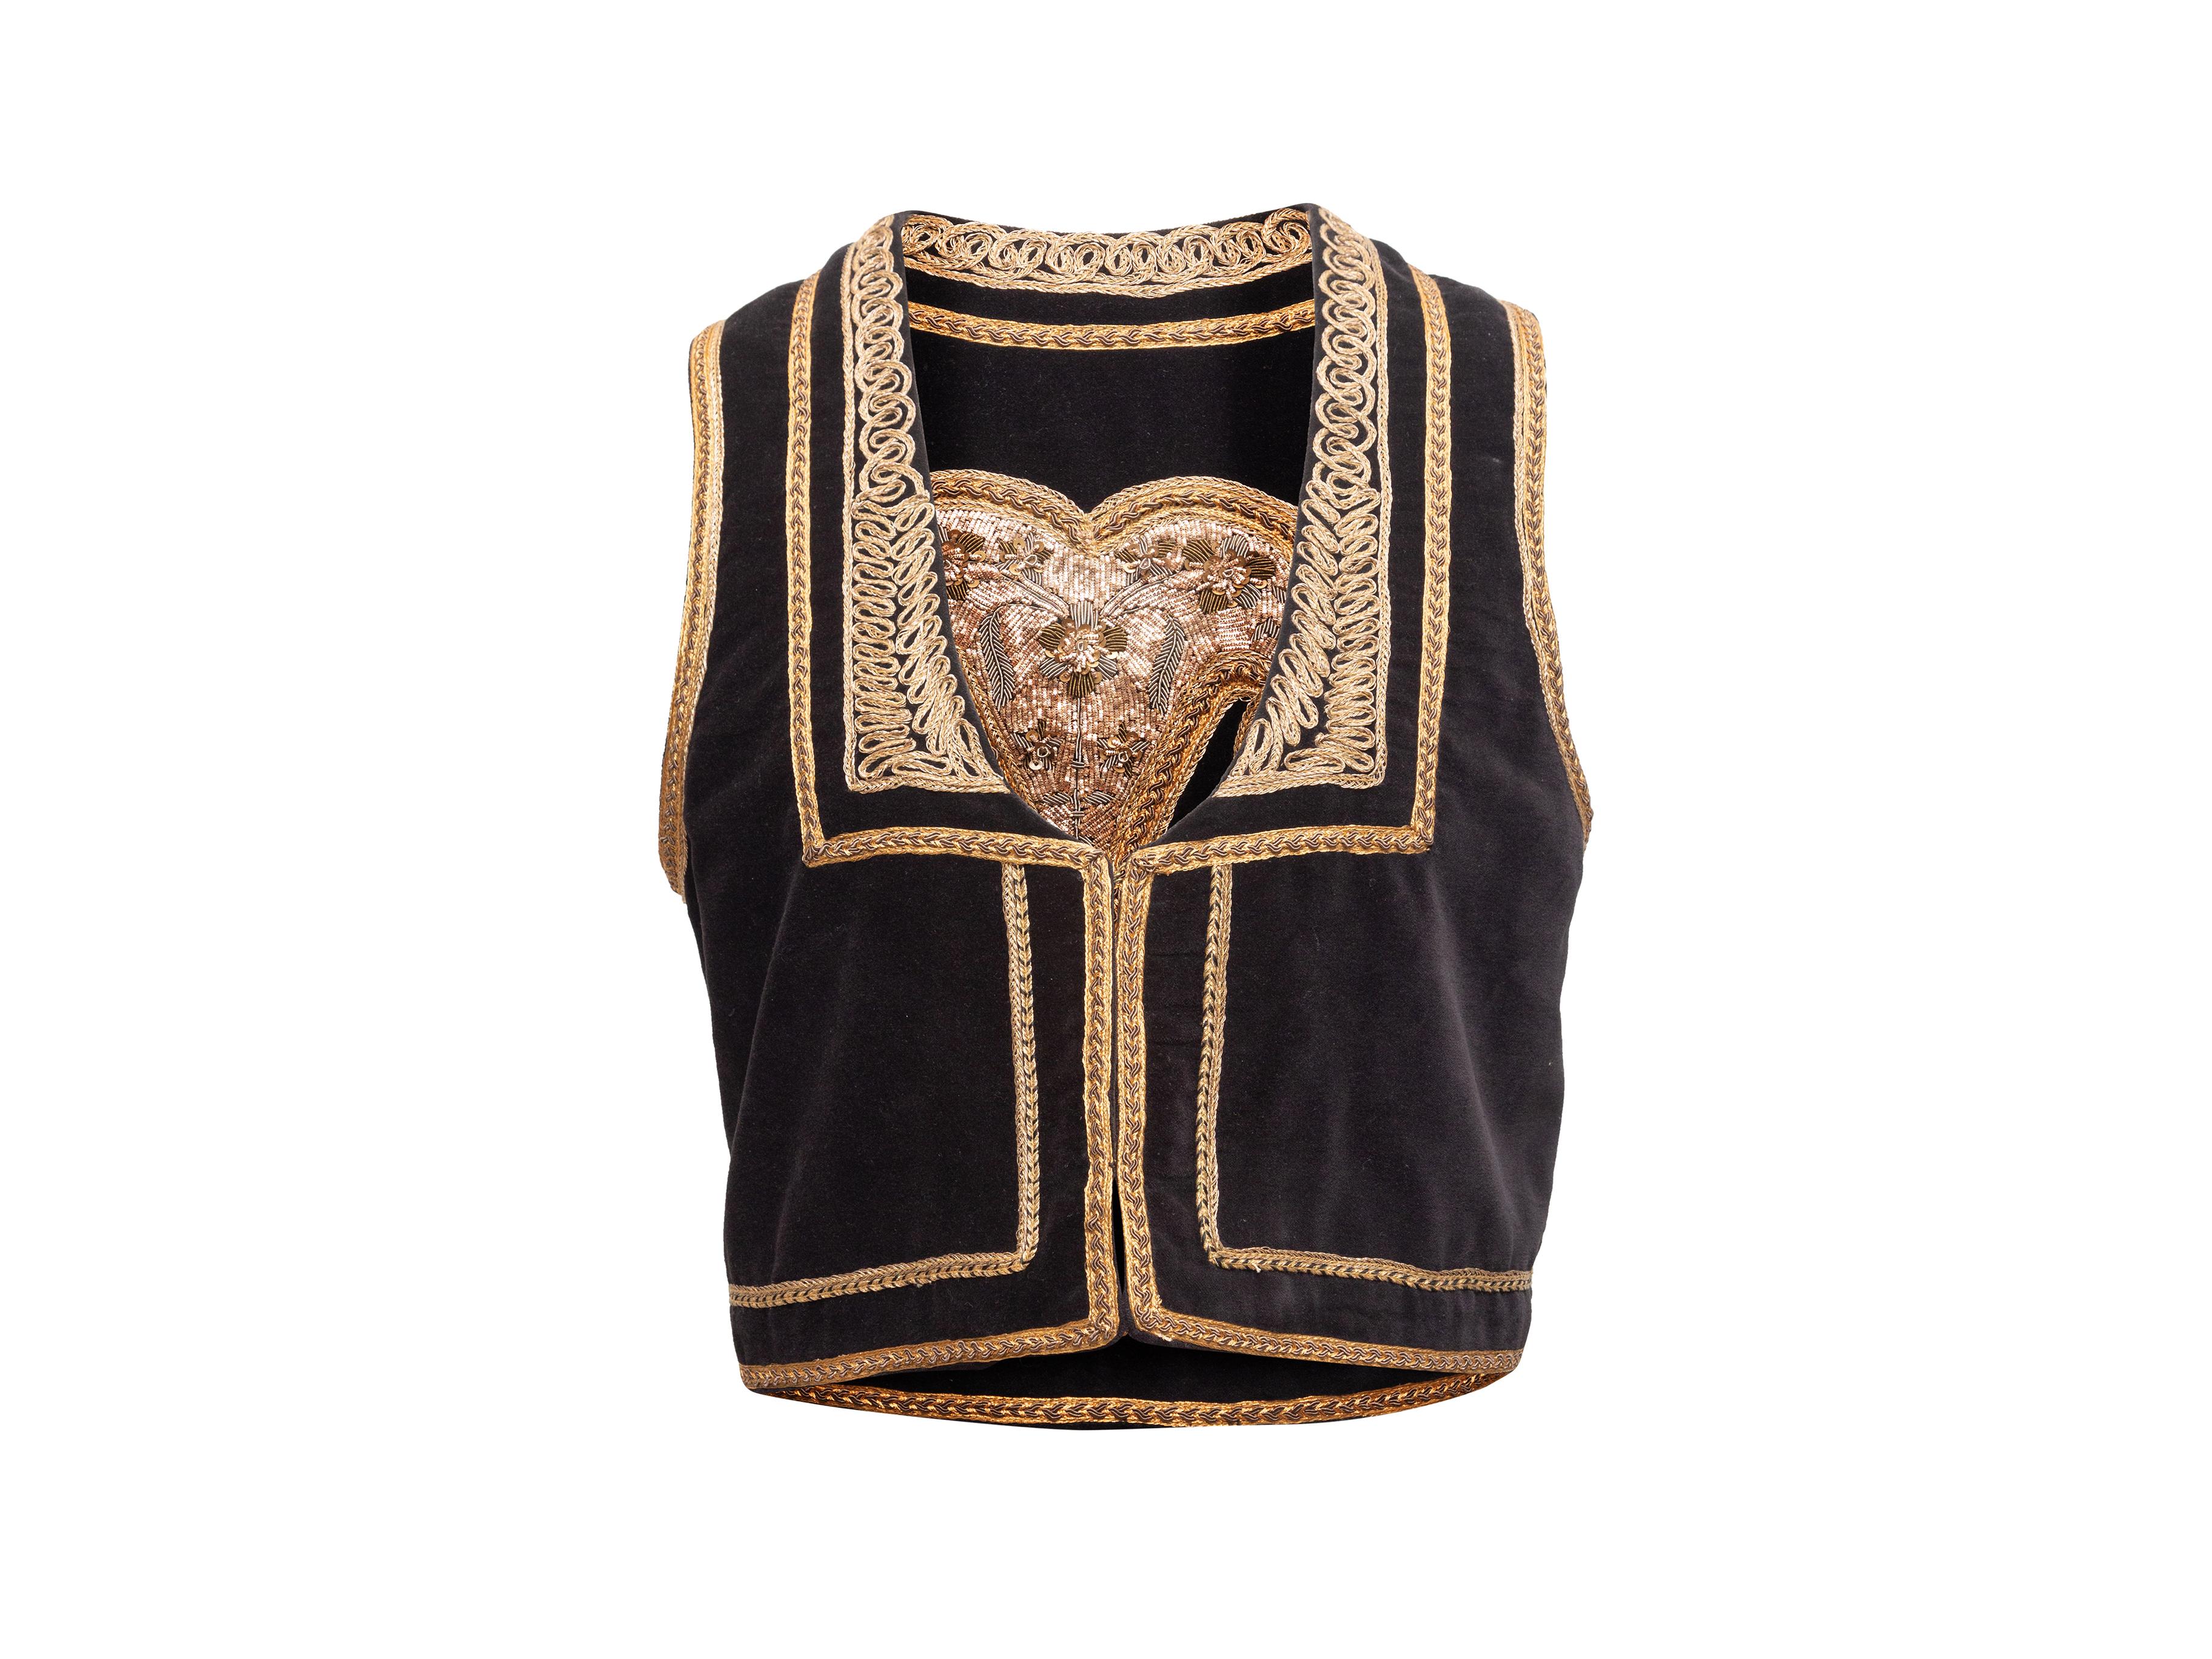 Product details: Black velvet vest by Nili Lotan. Metallic gold embroidery throughout. Scoop neck. Pointed collar. Hook-and-eye closures at front. 37